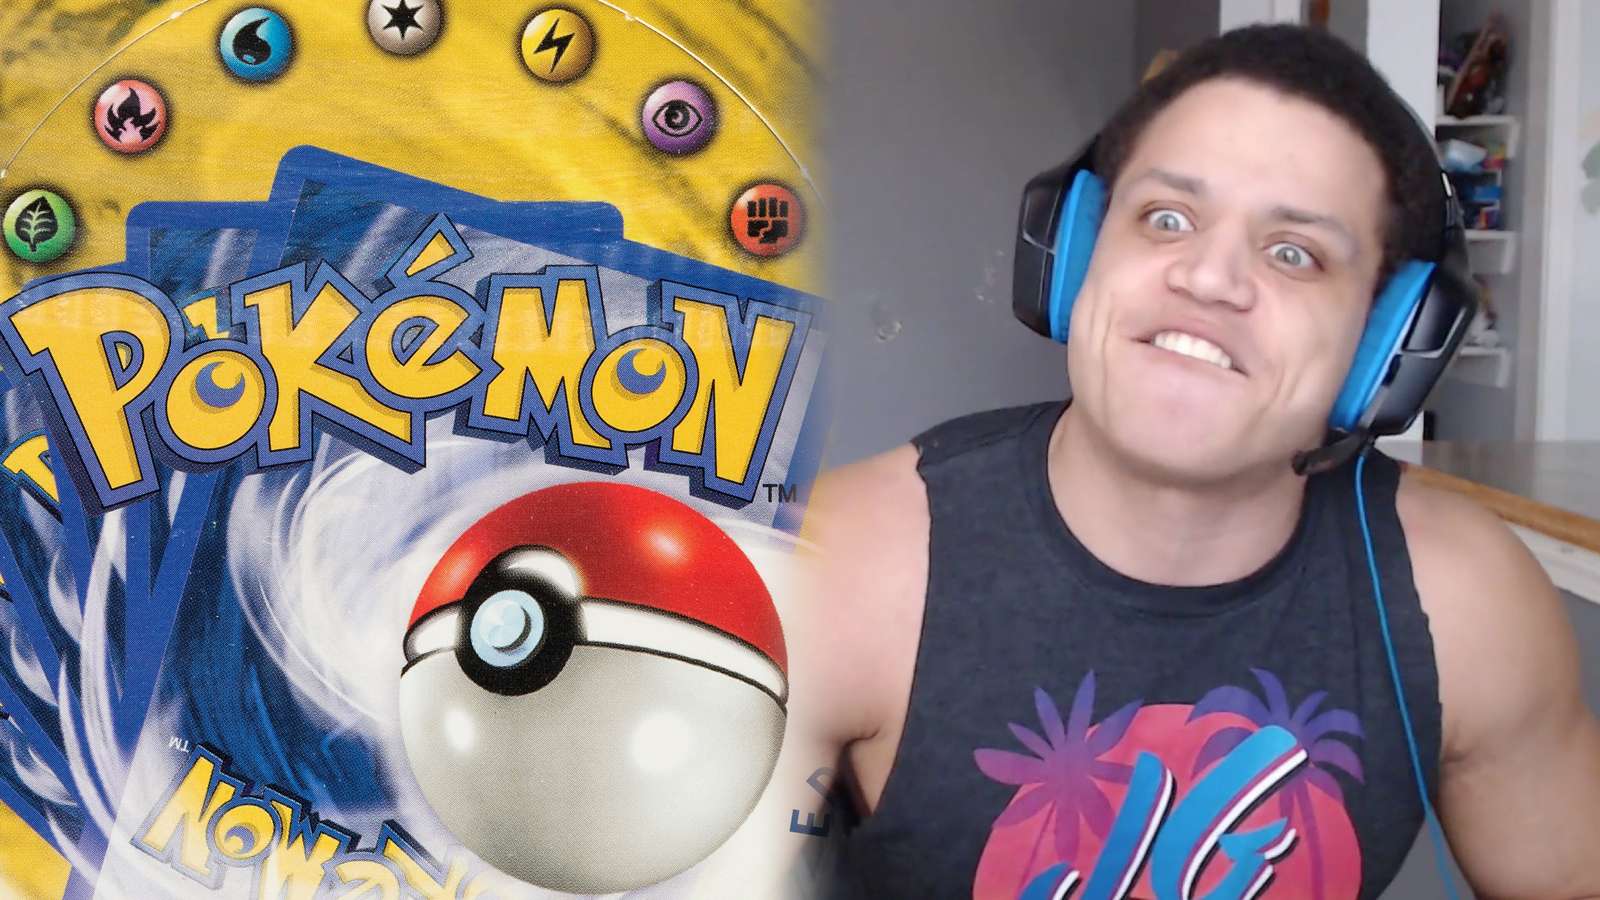 Tyler 1 rages over Pokemon cards